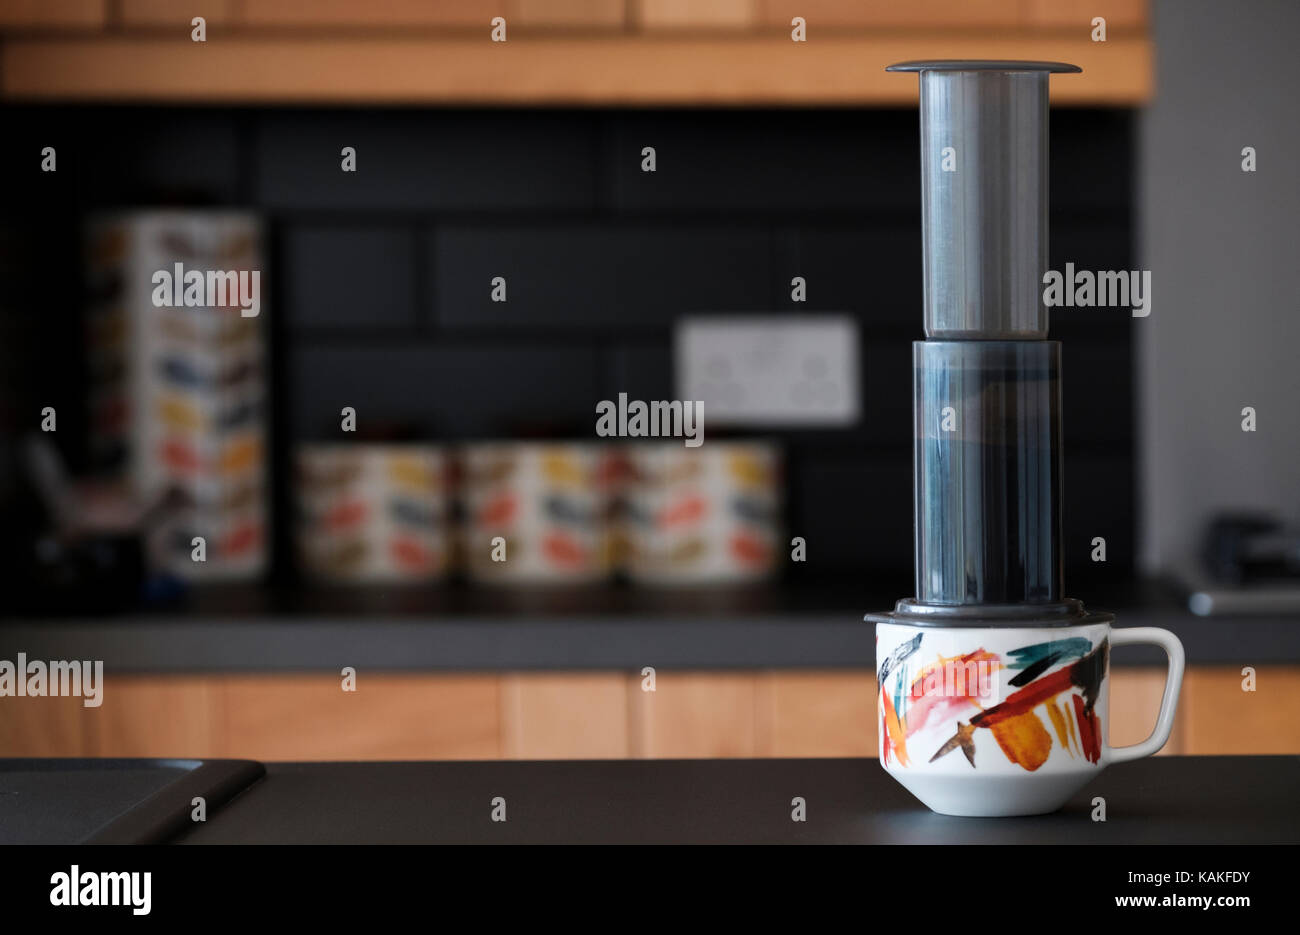 An aeropress.inc coffee maker being used to brew coffee in a domestic kitchen Stock Photo